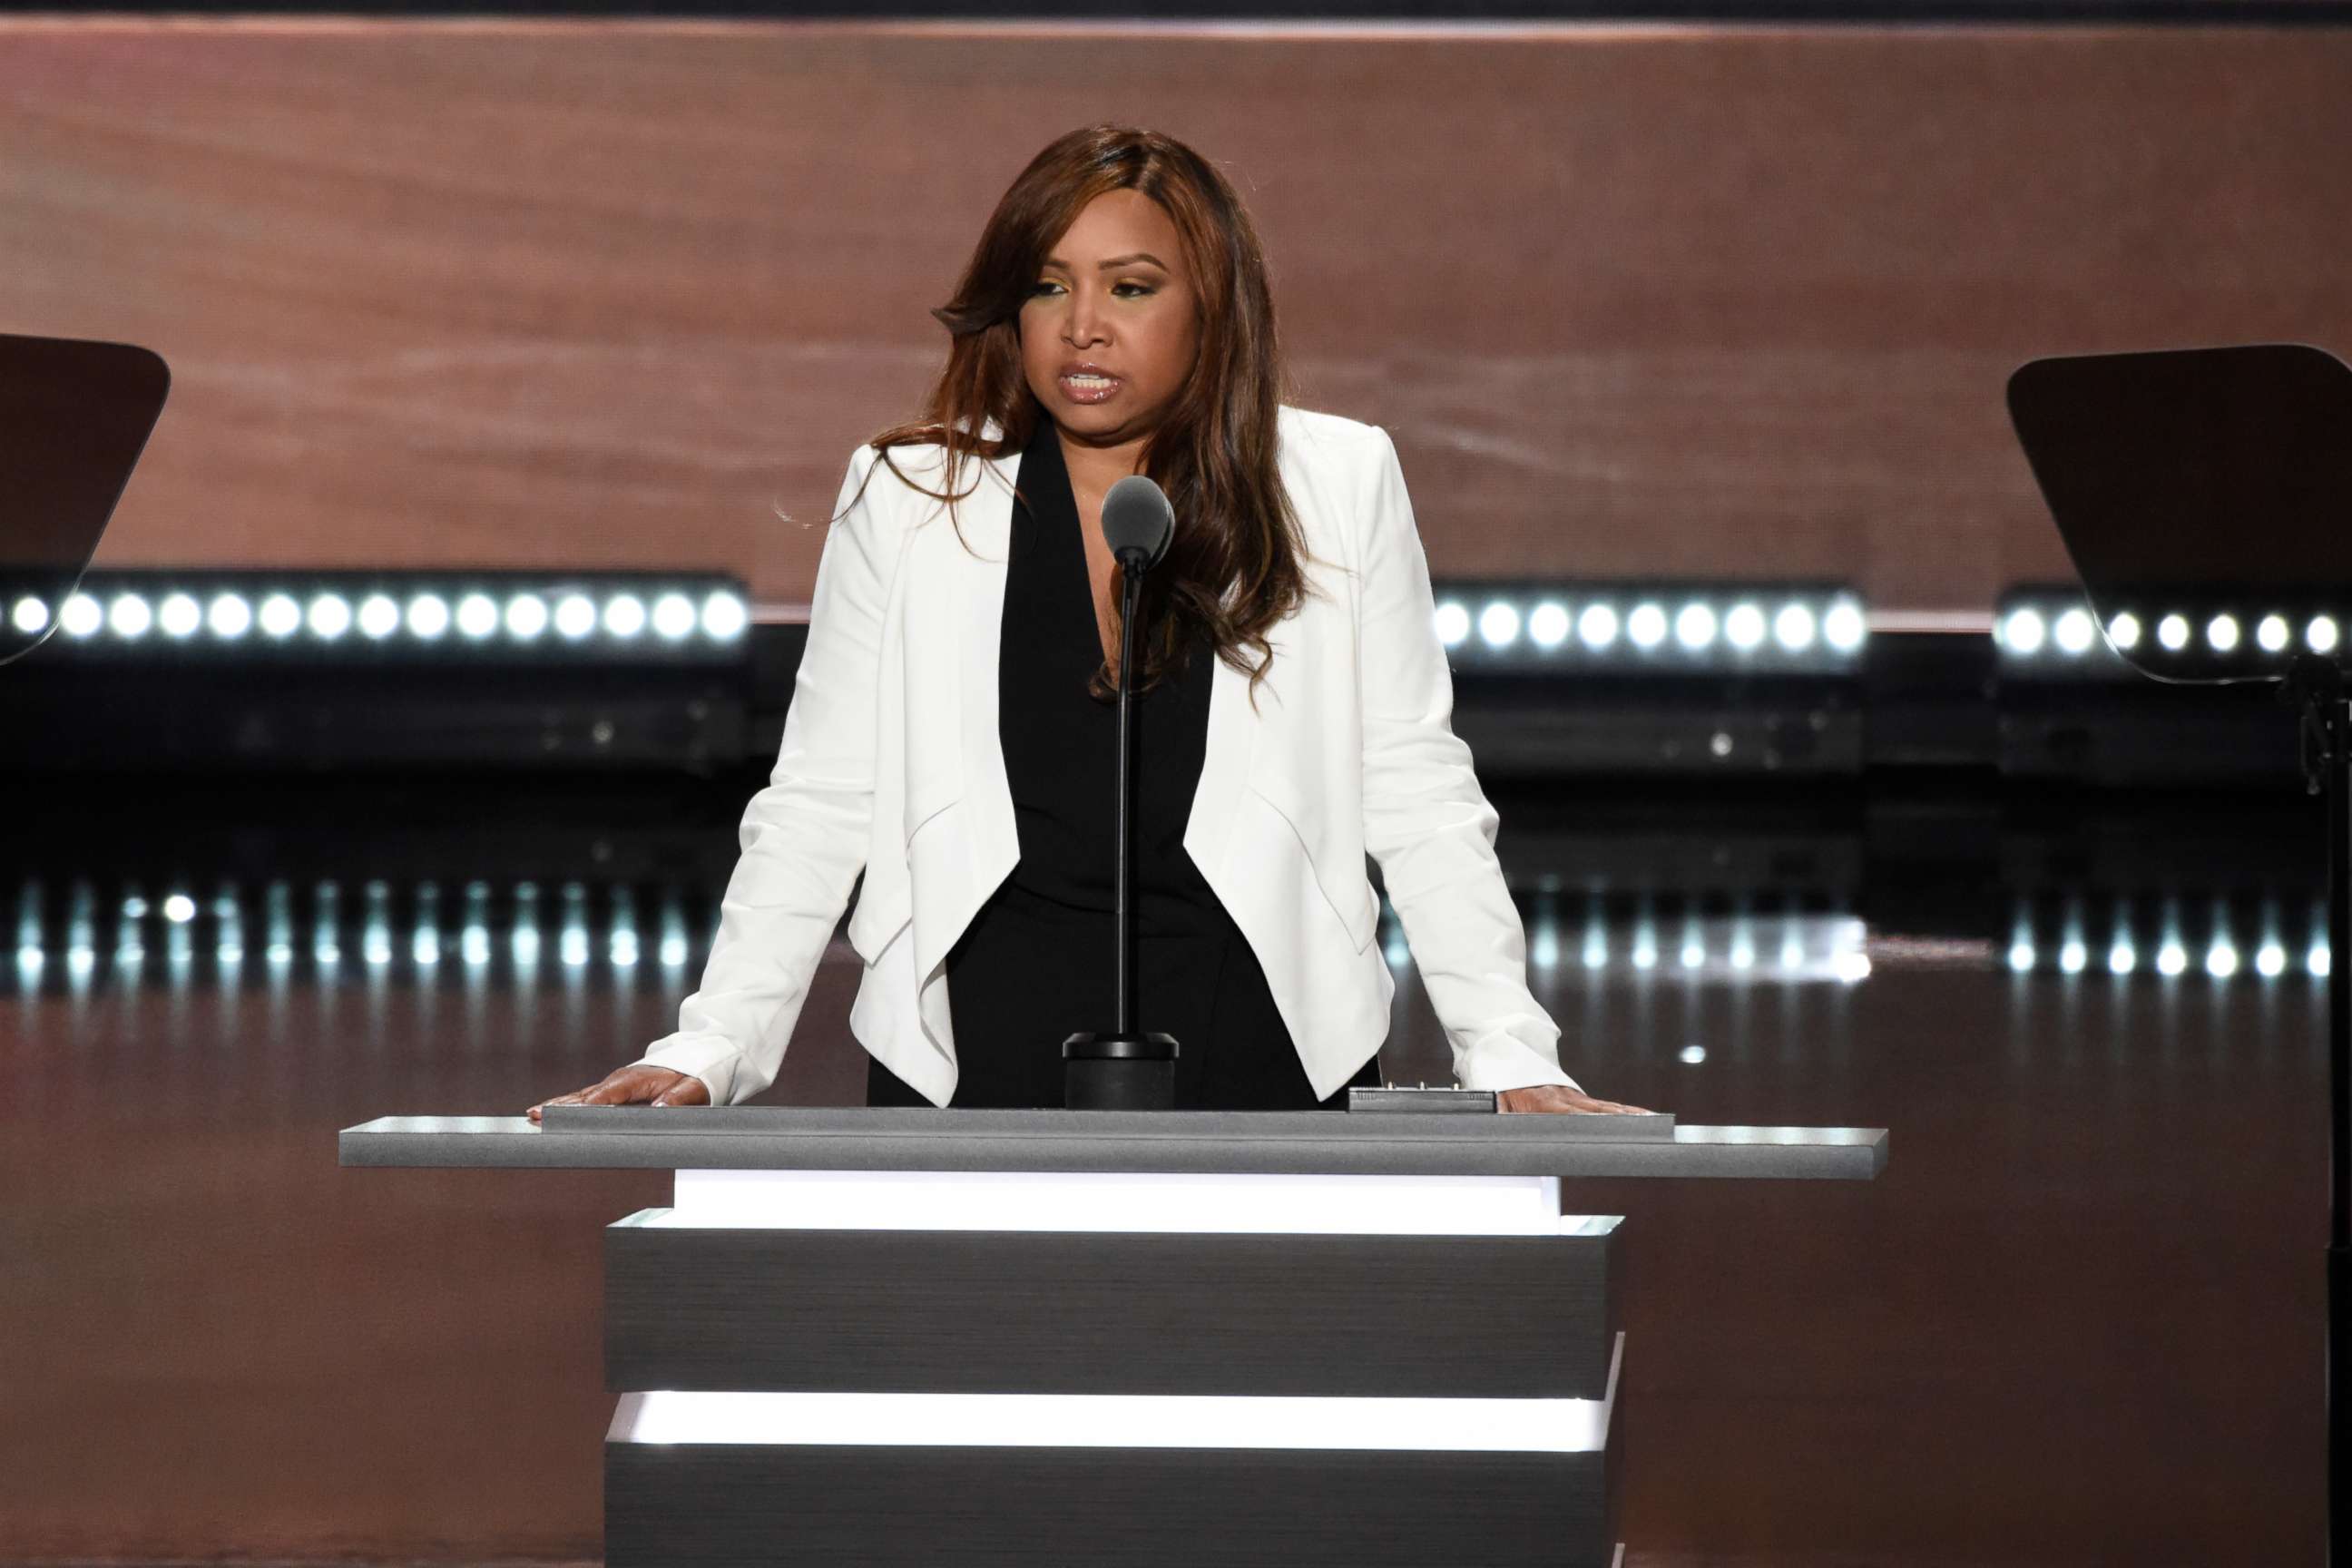 PHOTO: Lynne Patton, vice president of the Eric Trump Foundation, speaks during the Republican National Convention in Cleveland, July 20, 2016.